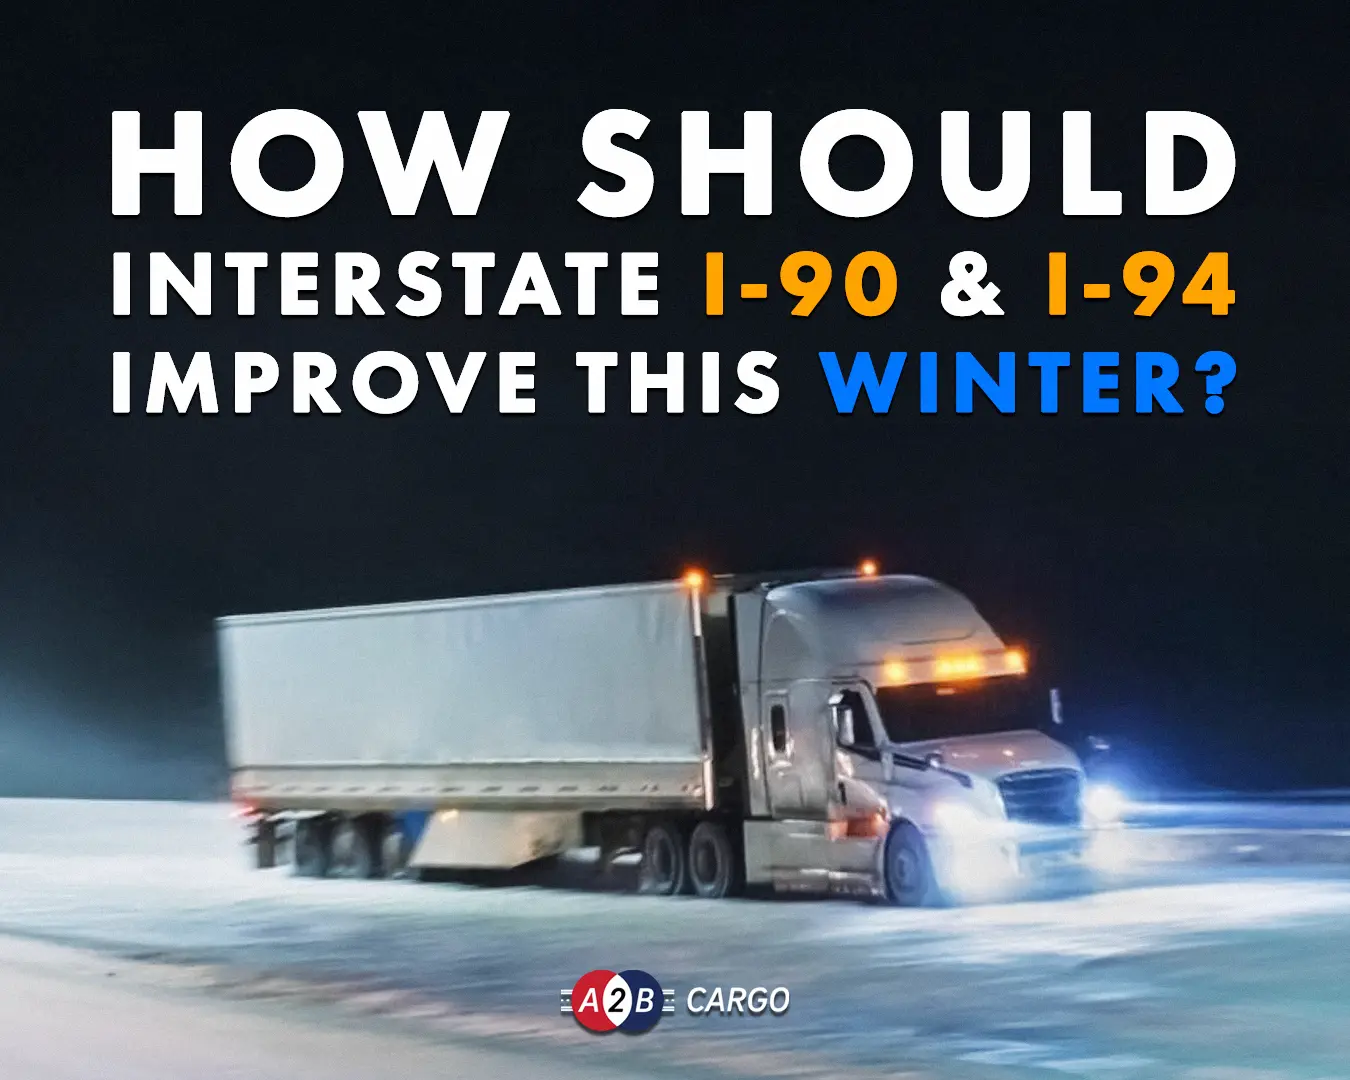 Winter conditions on I-90 & I-94 – Survey